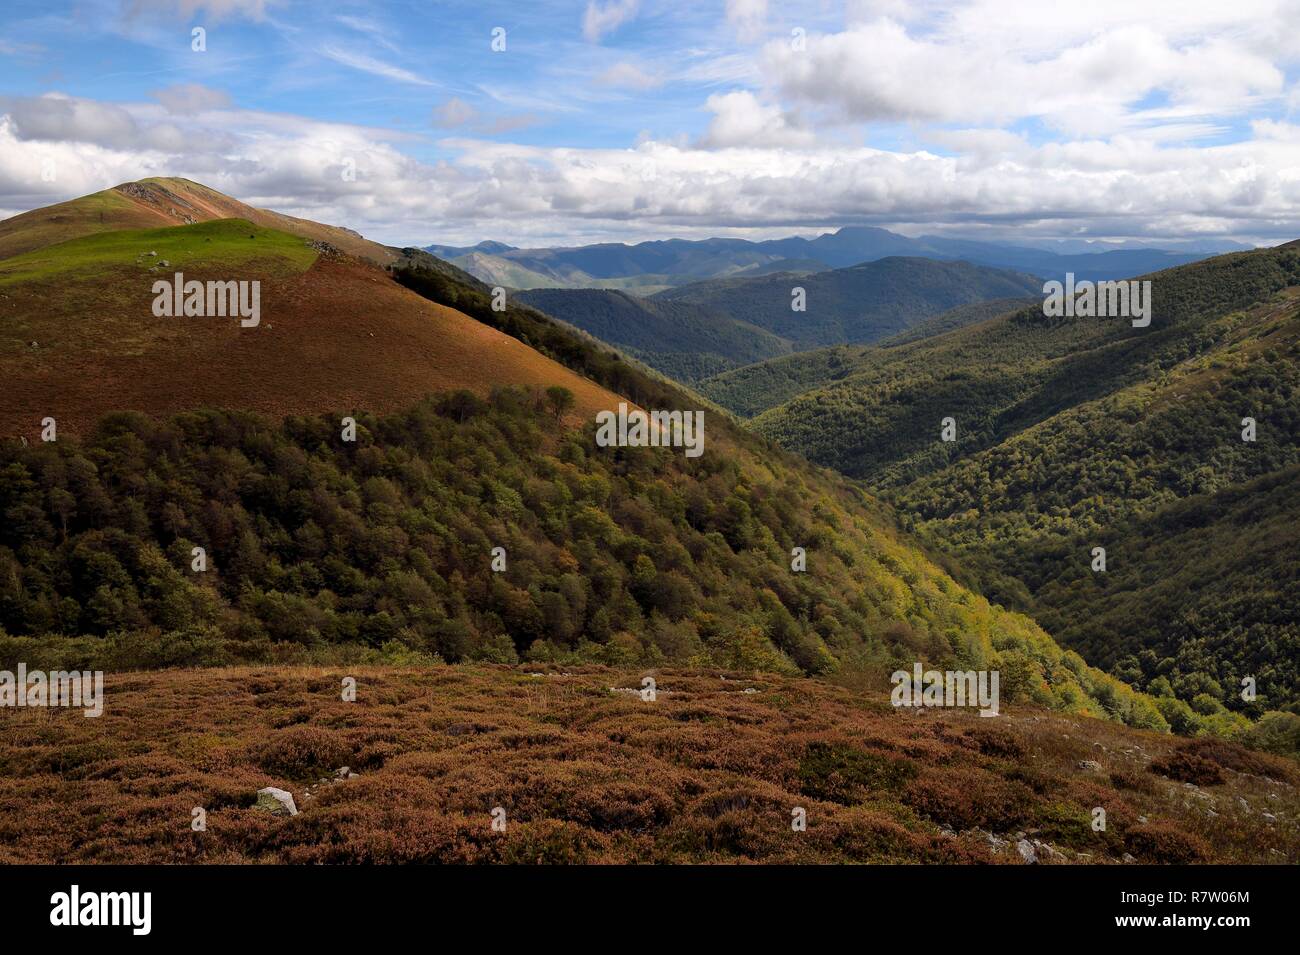 Spain, Basque Country, Navarra, Camino de Santiago (the Way of St. James) between Saint Jean Pied de Port and Roncesvalles, the Iraty forest in the valley, it is the largest beech forest in Europe Stock Photo